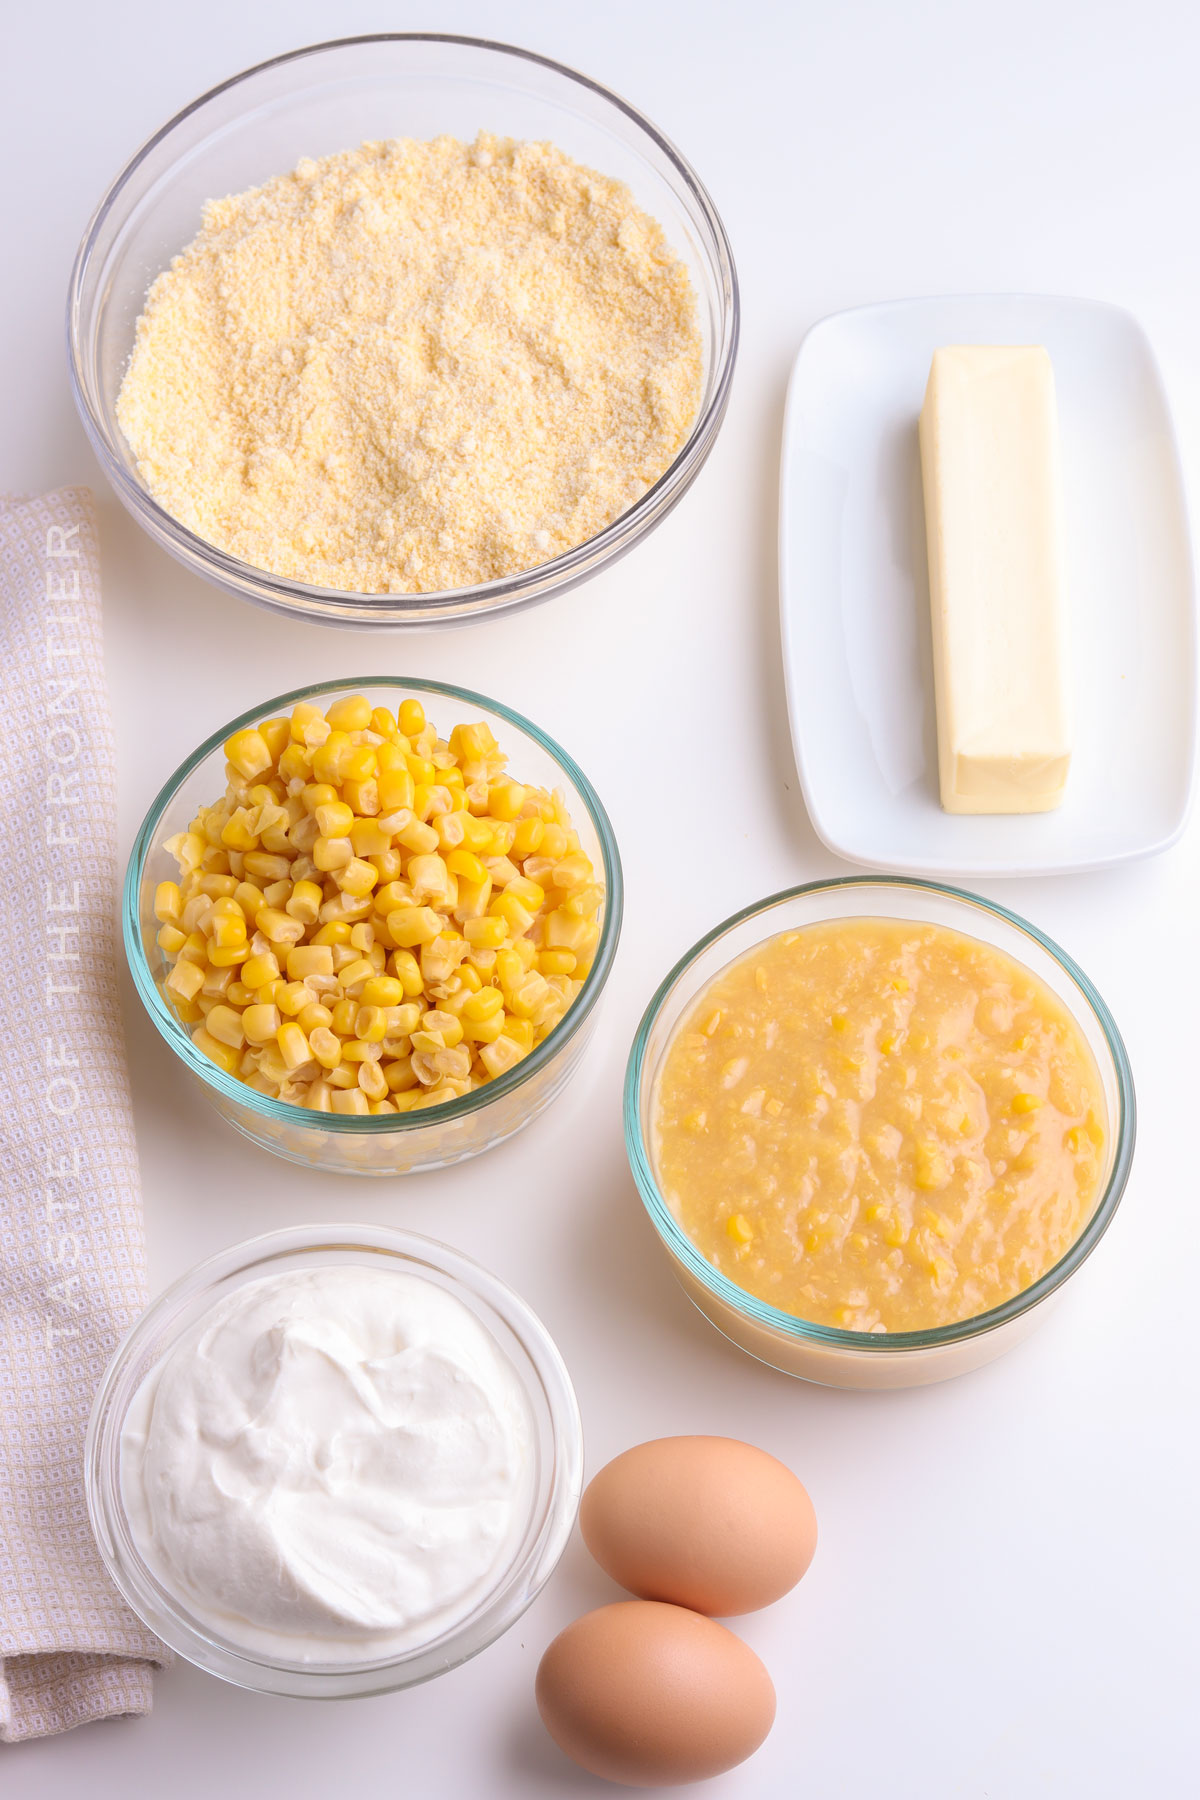 Corn Casserole with Jiffy Mix ingredients